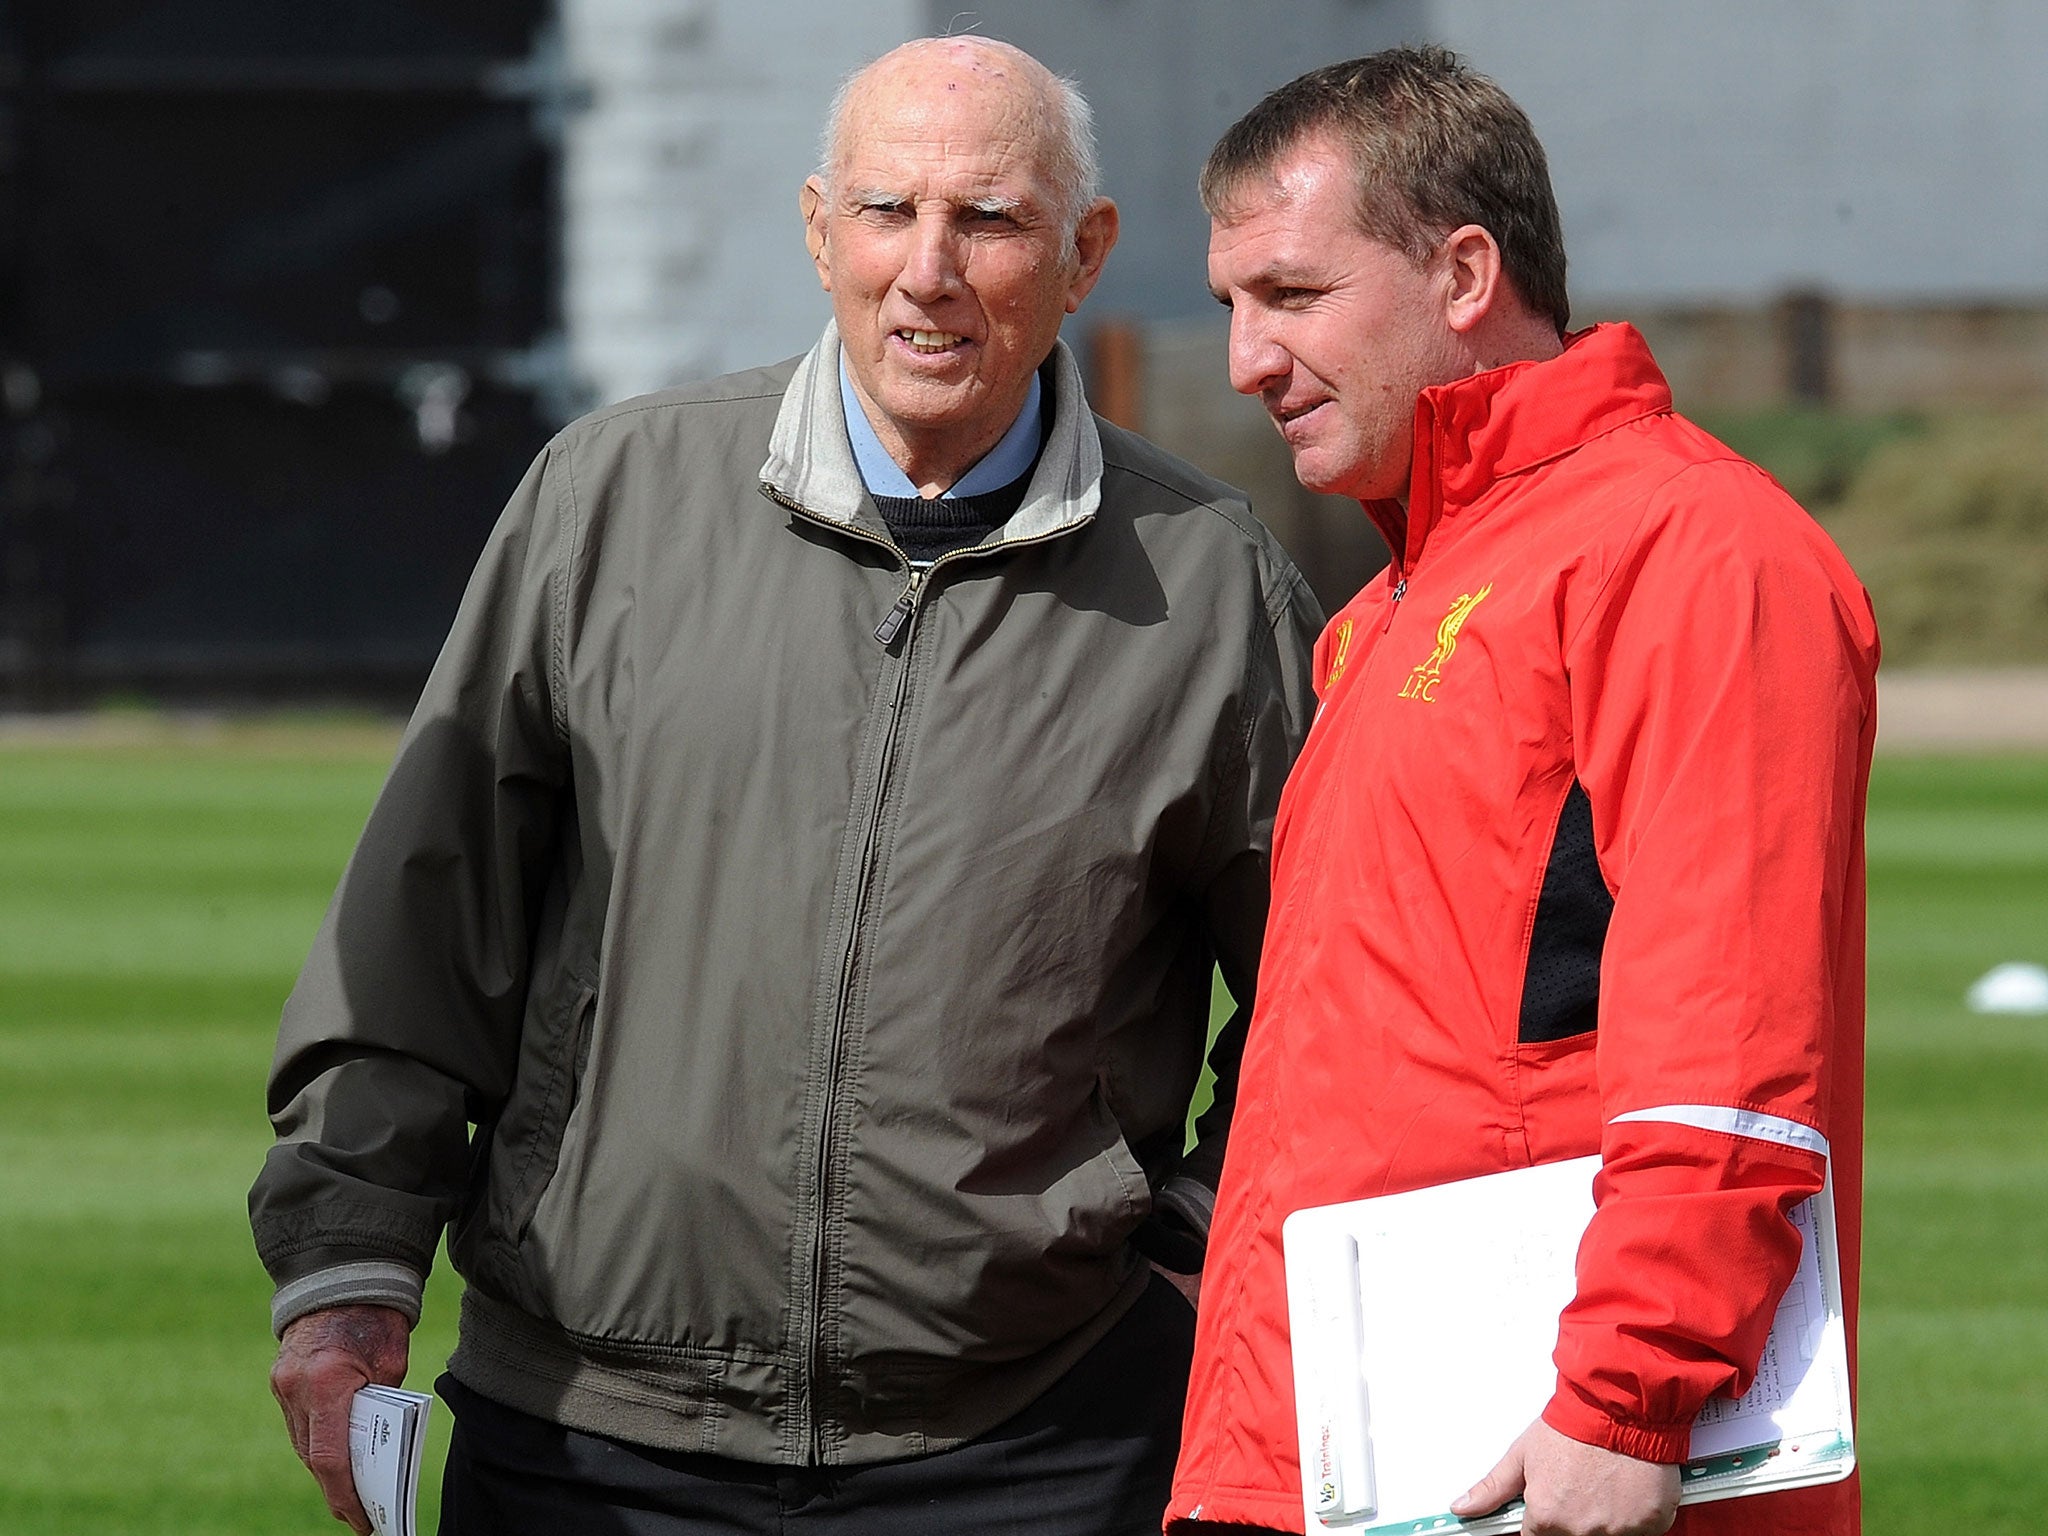 &#13;
Moran was a frequent visitor to Melwood in his later years &#13;